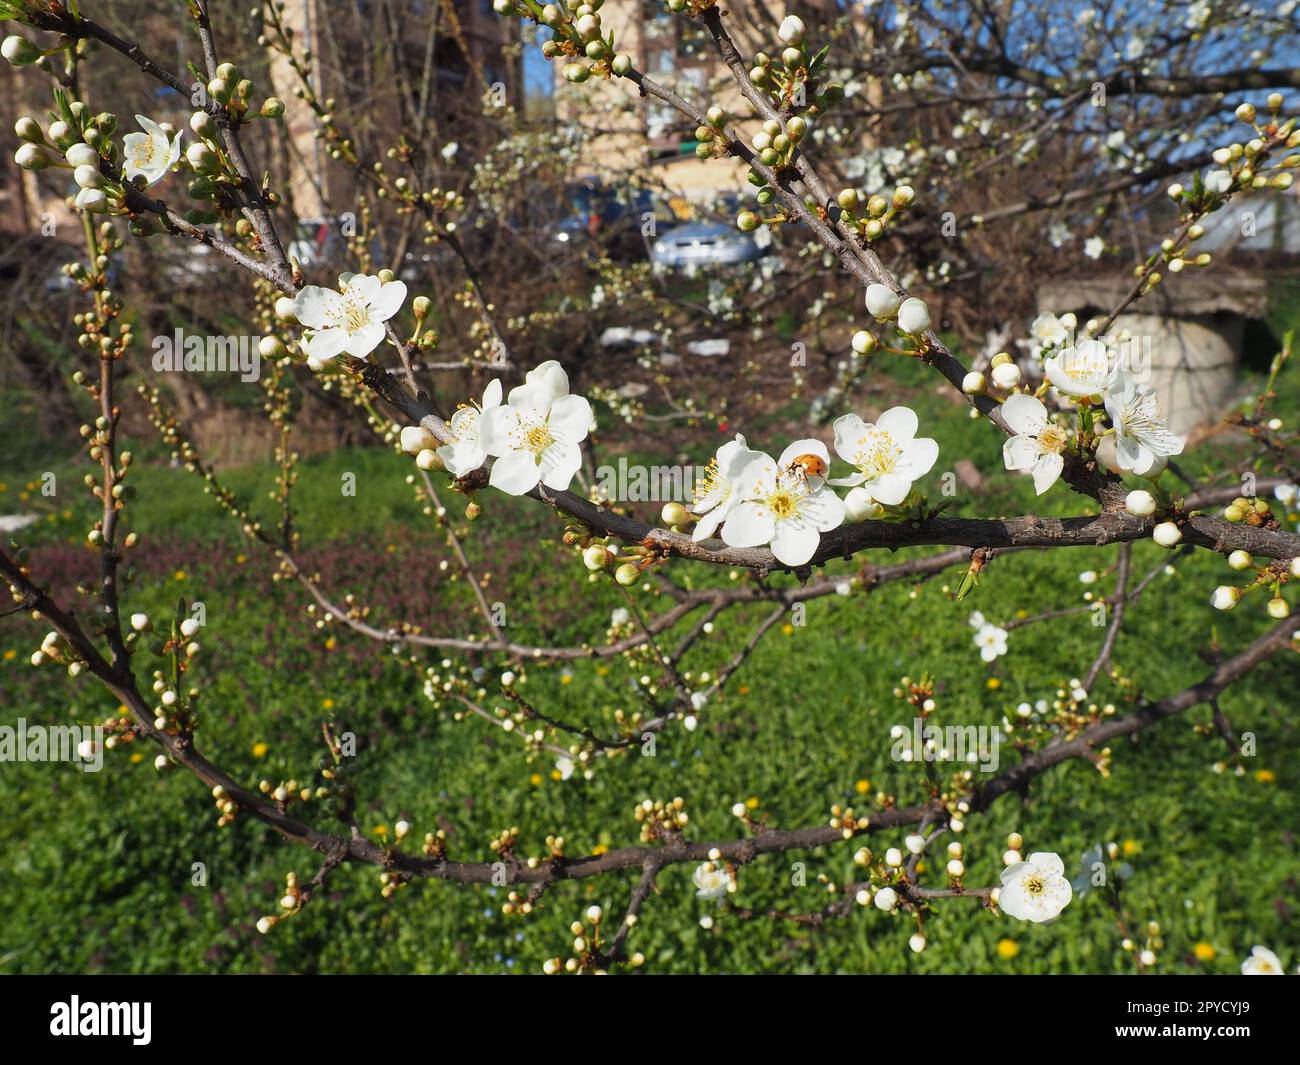 Blooming fruit trees in the garden. Cherries, sweet cherries, plums, apple trees in bloom. White flowers on the branches. Stock Photo